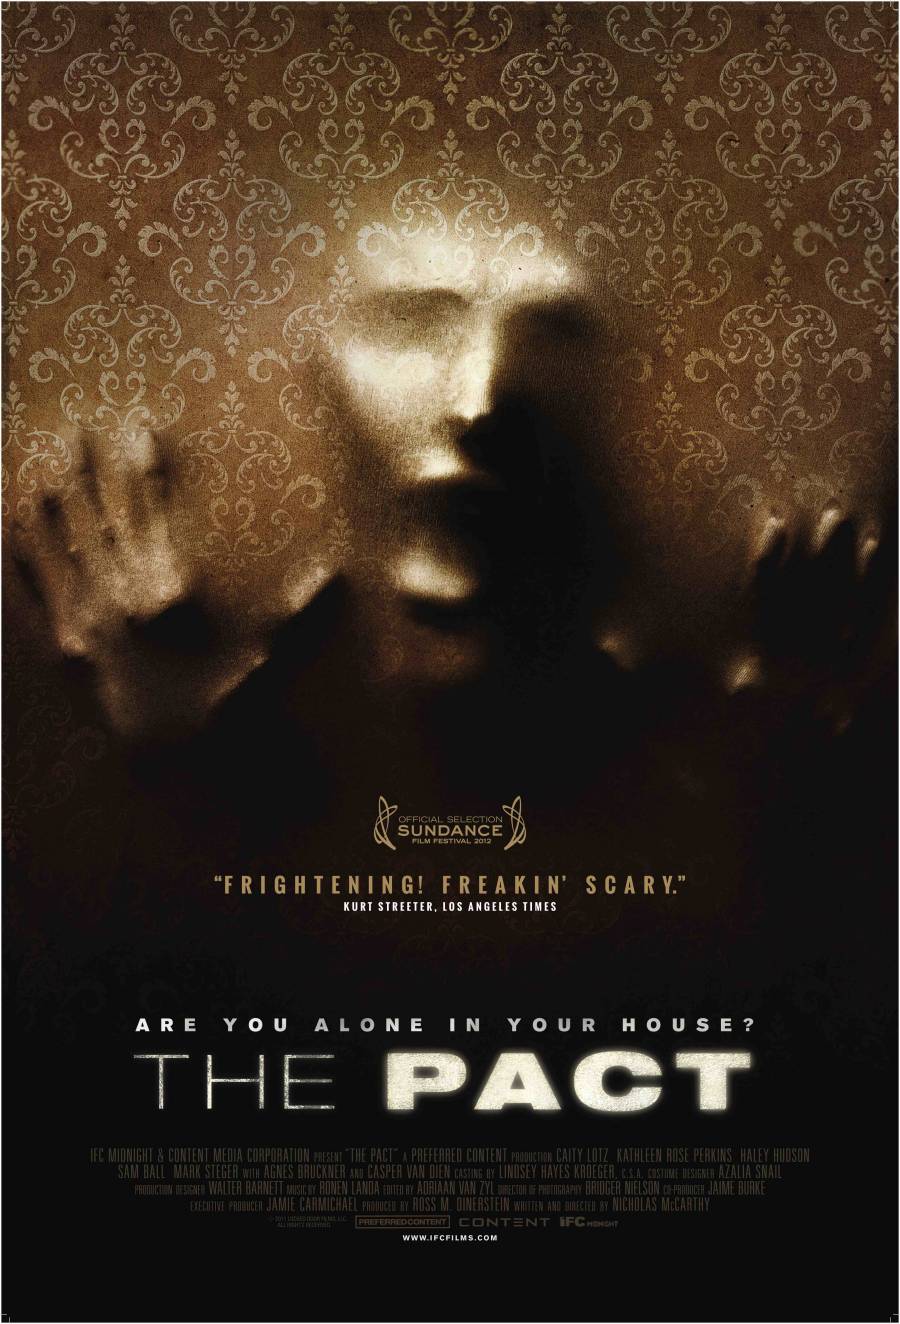 THE PACT Poster